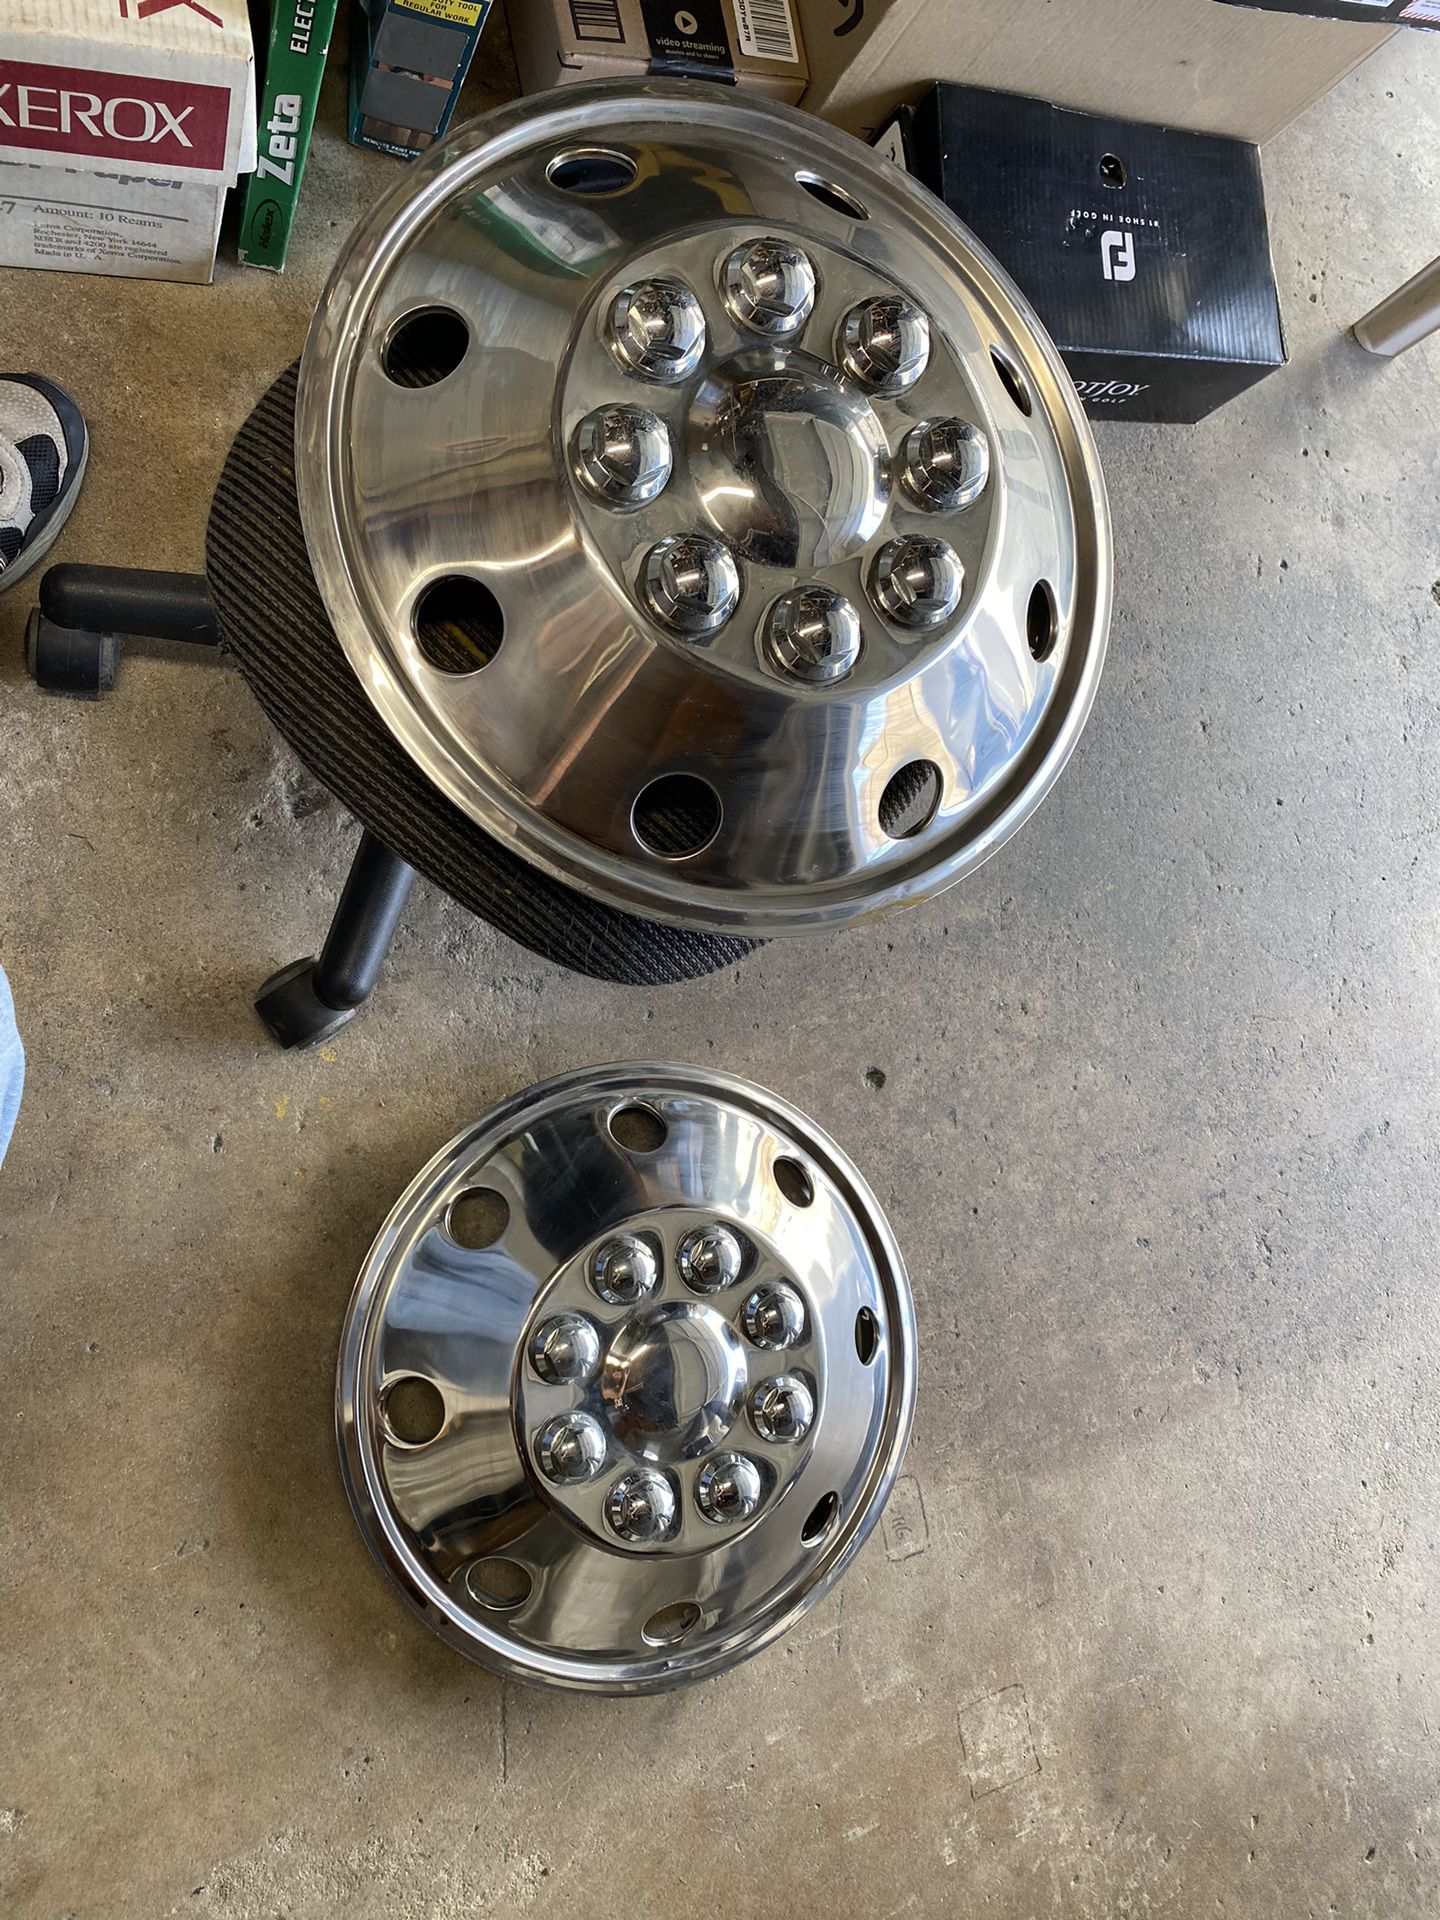 2 Hubcaps Will fit Ford E-450 RV or Truck.